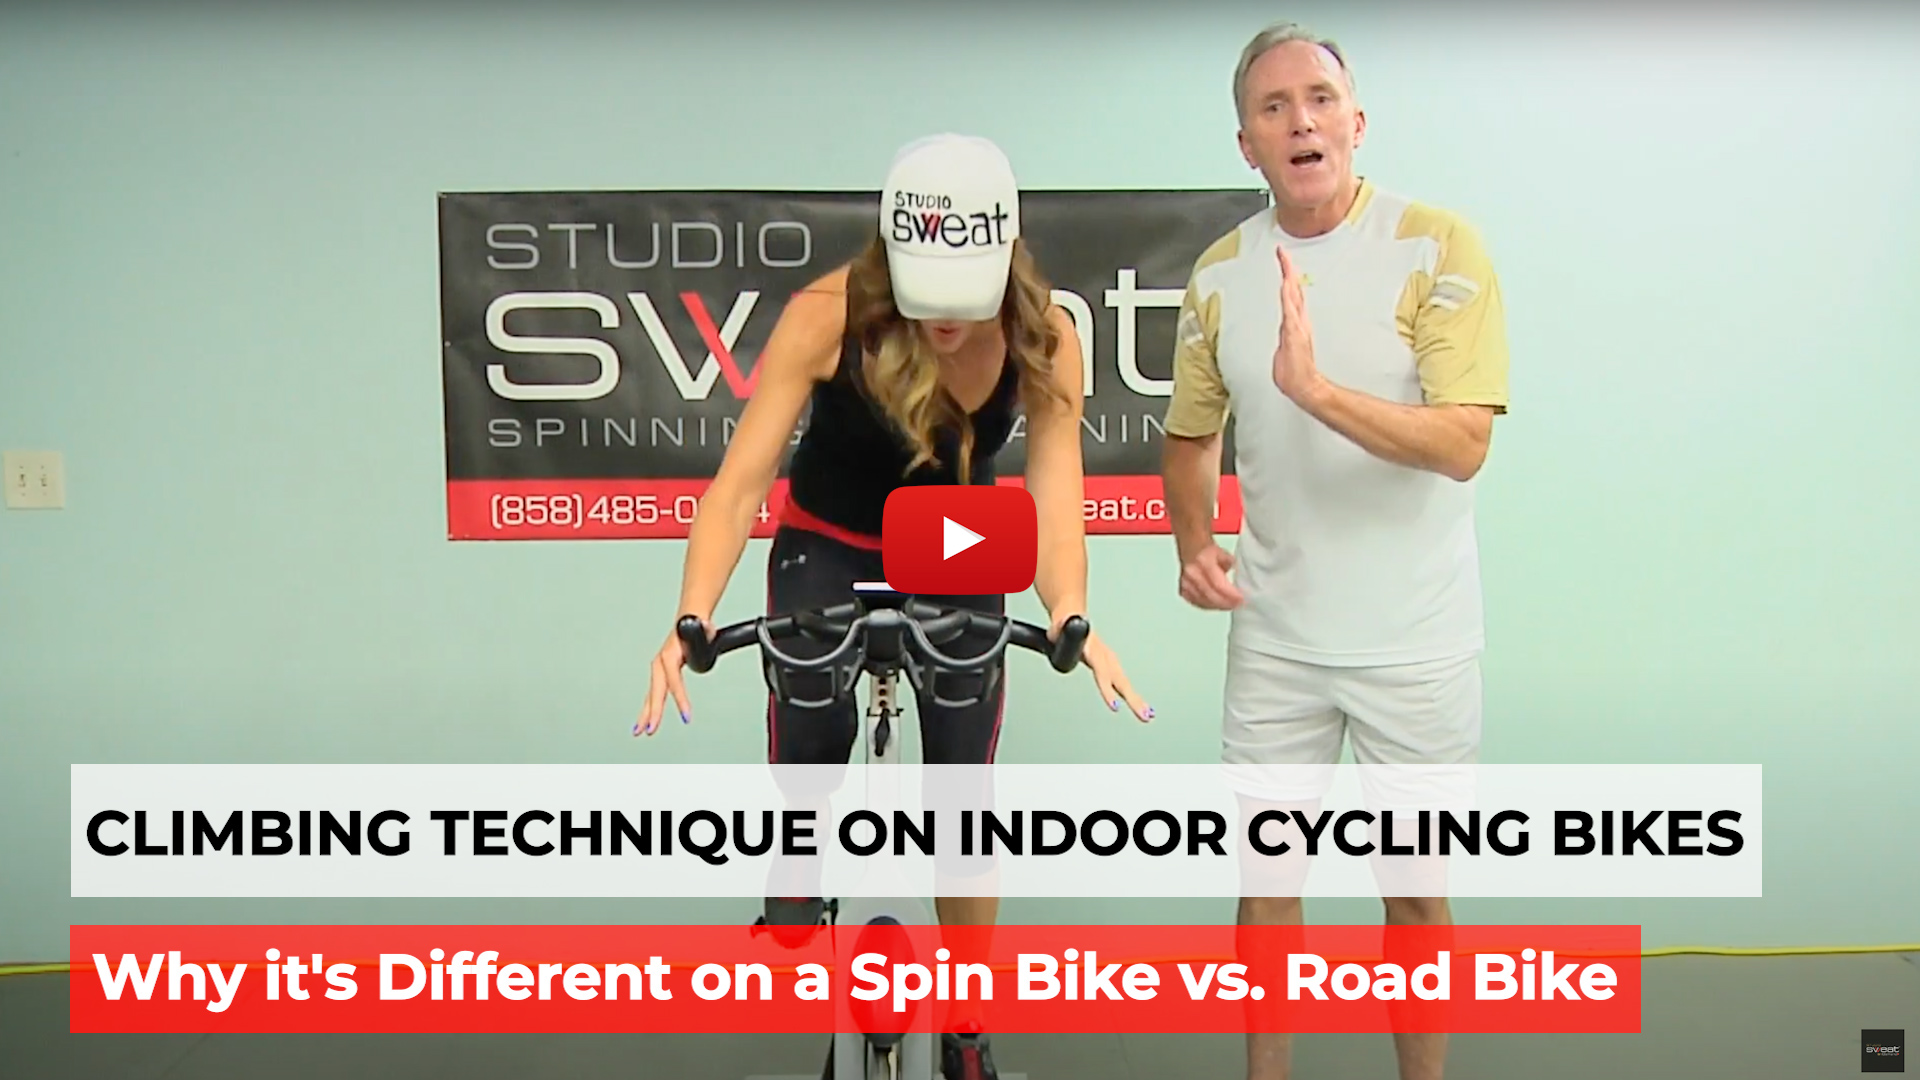 The Difference Between How to Ride on a Spin Bike vs. an Outdoor Bike YT play button